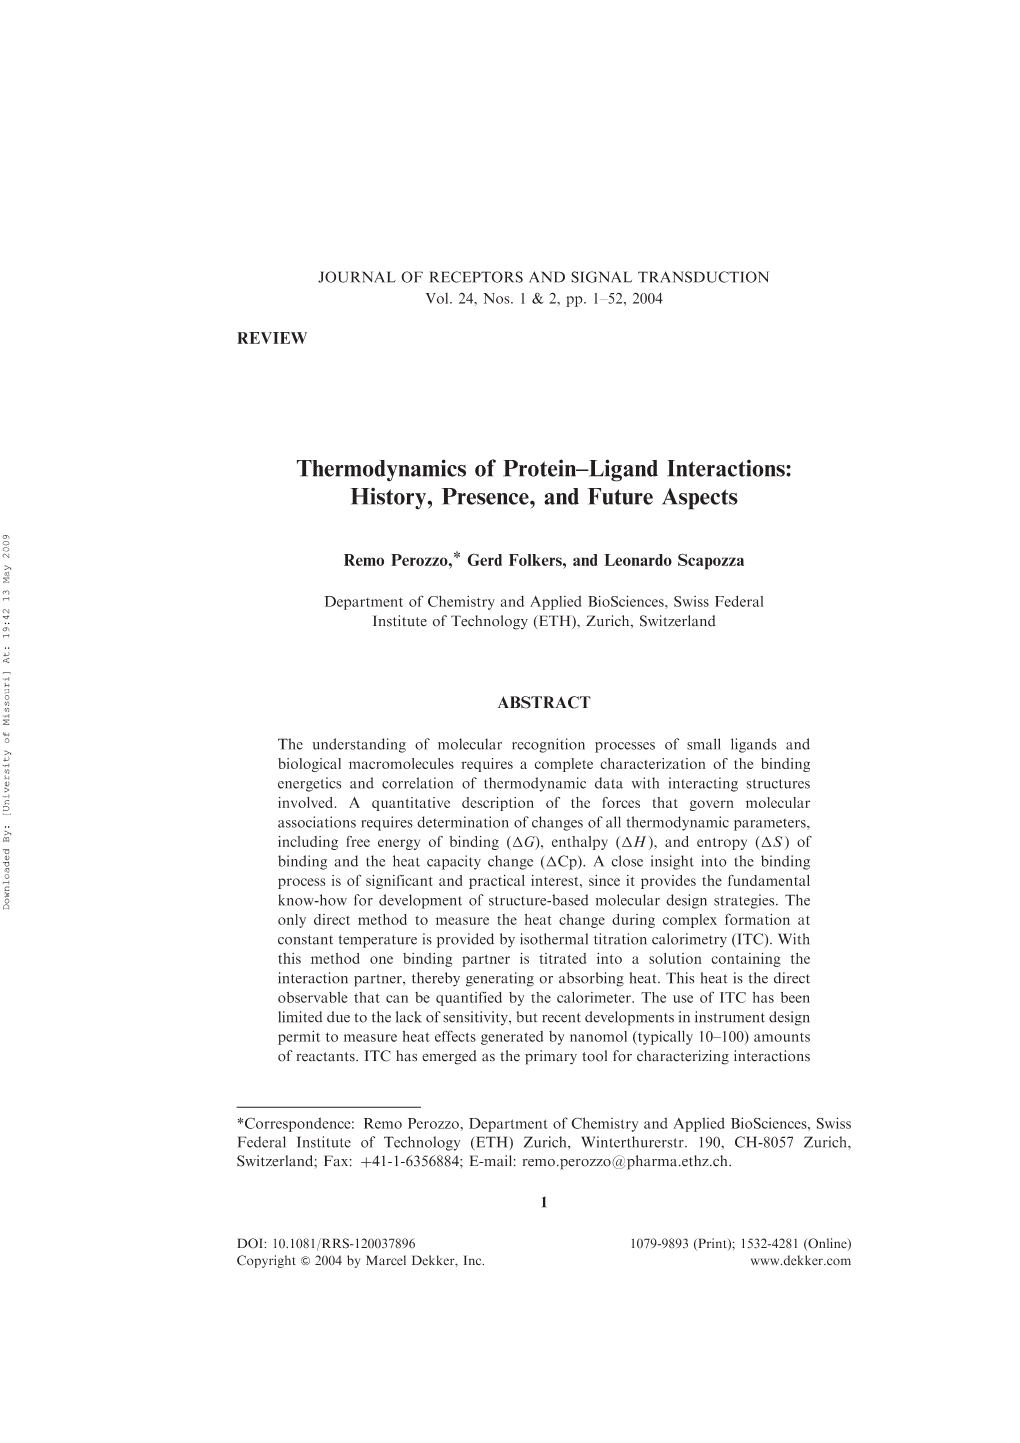 Thermodynamics of Protein–Ligand Interactions: History, Presence, and Future Aspects